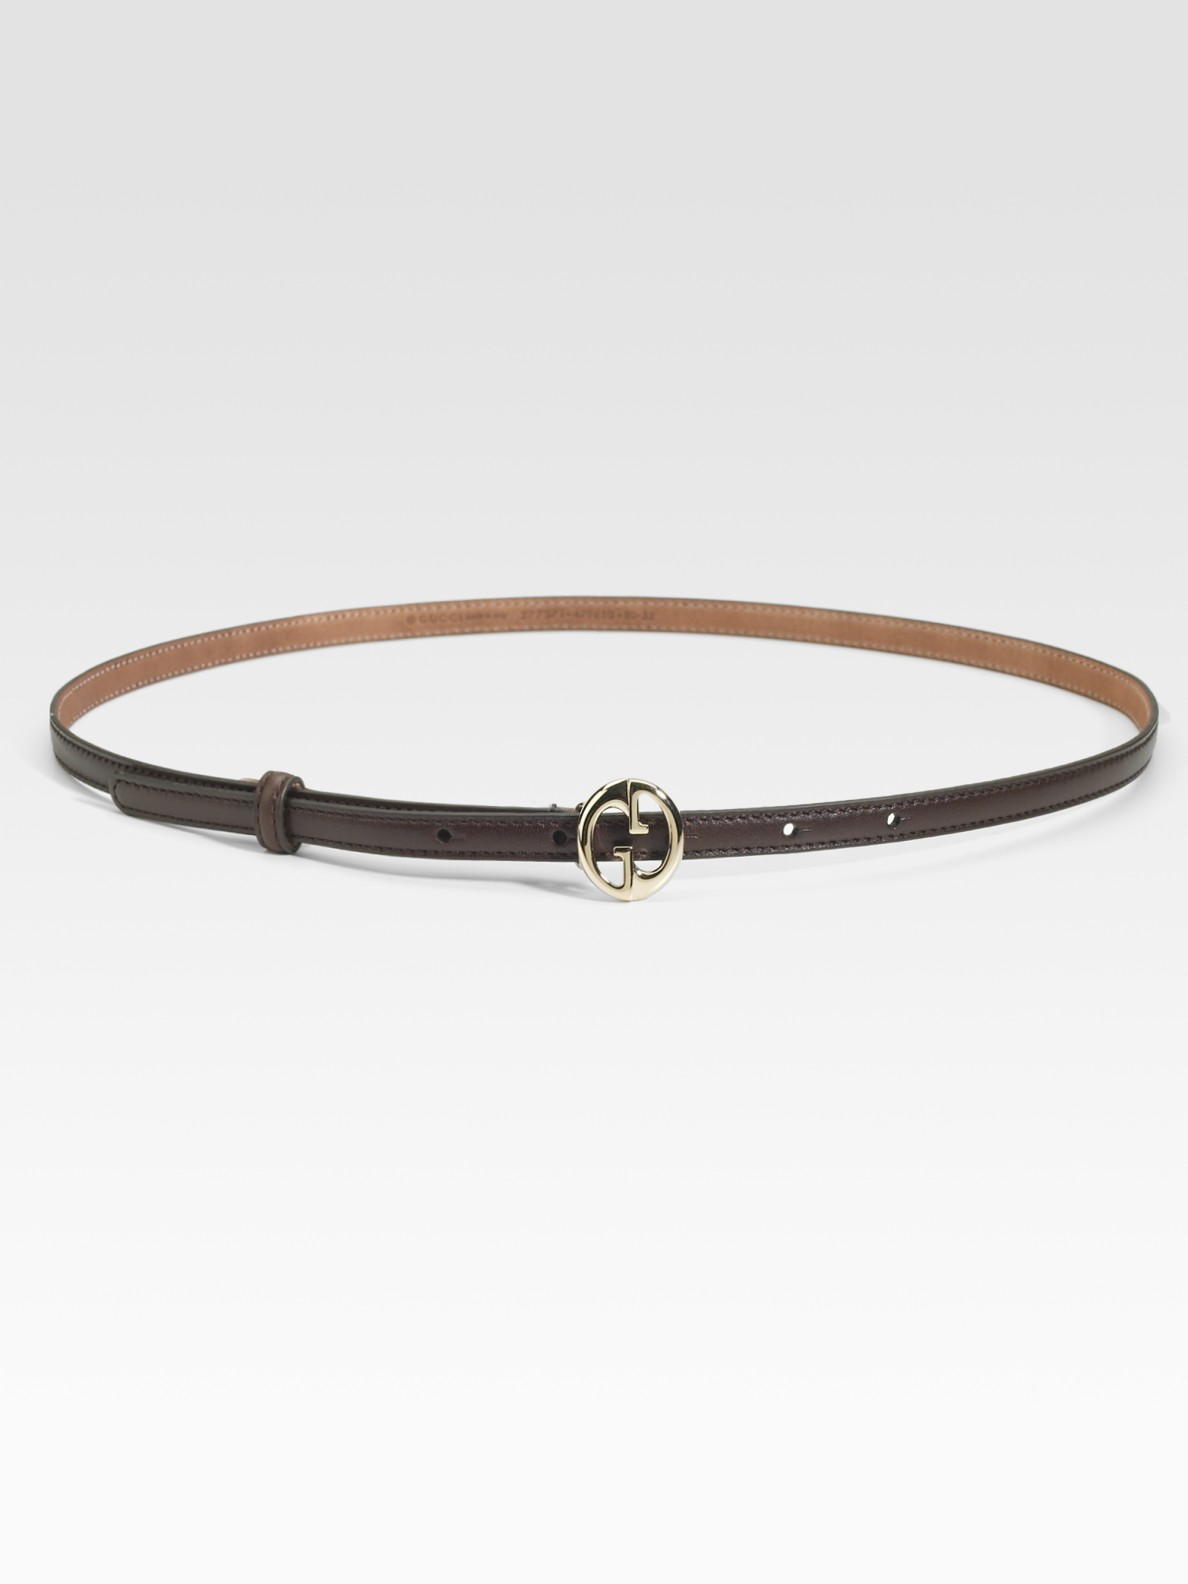 Gucci Skinny Gg Leather Belt in Brown (cocoa) | Lyst